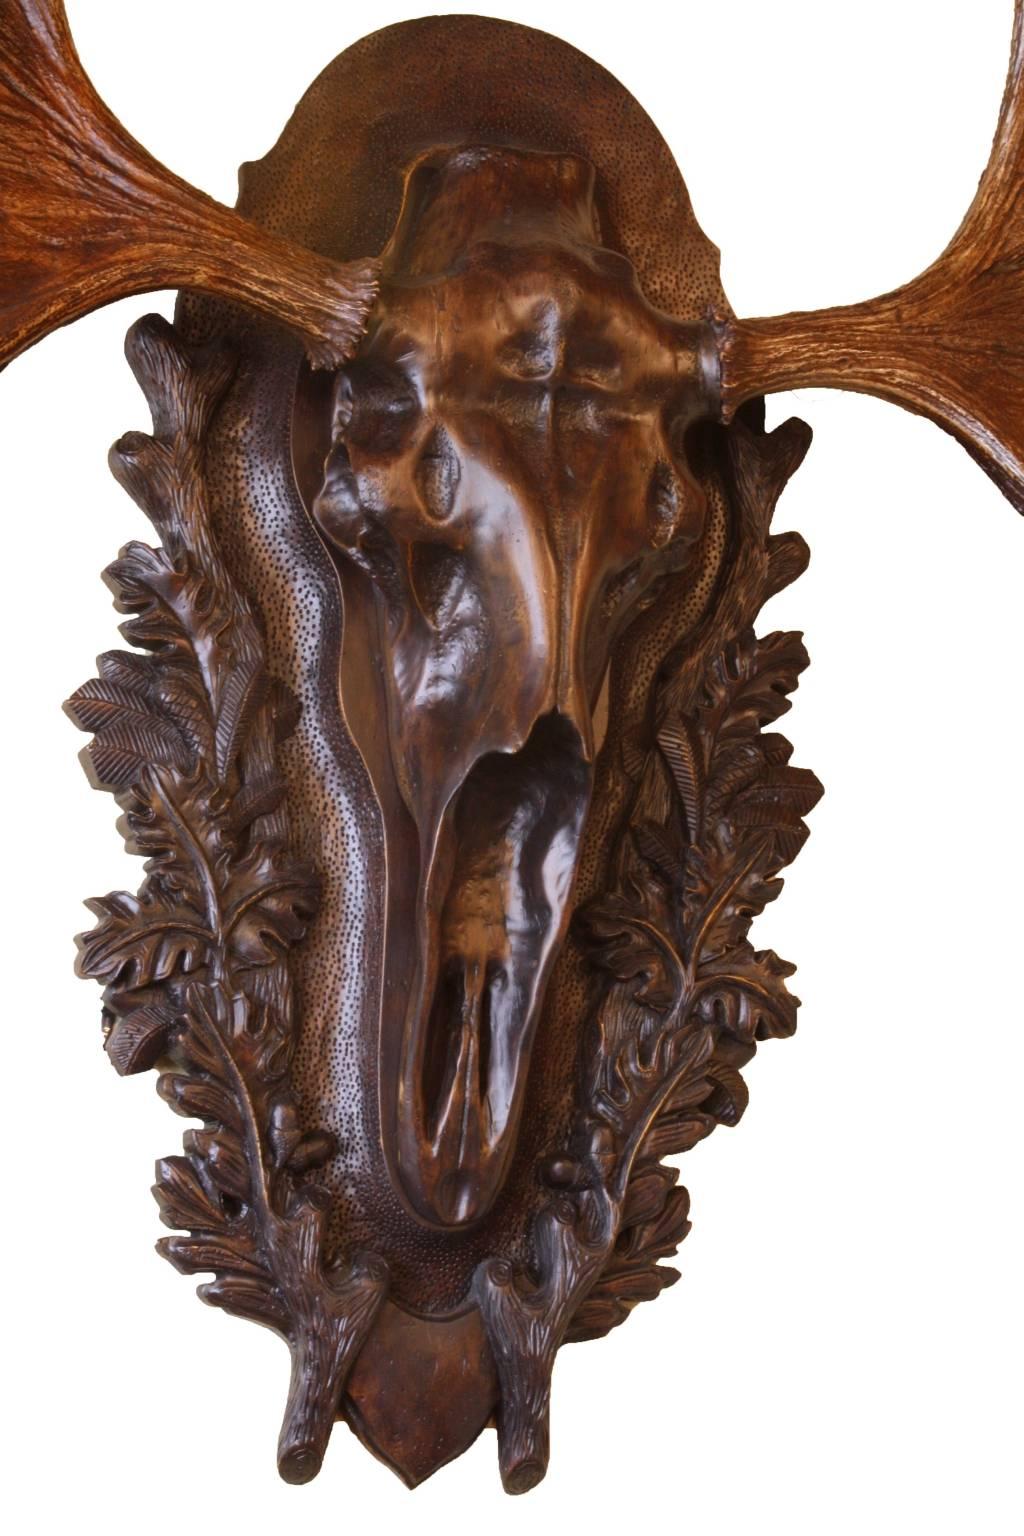 Expertly carved wooden plaque and moose skull in a European style, with shed American moose antlers mounted in a large, aggressive, forward facing position. Carved by artisan craftsman Brad Ham.

"Working with antlers and wildlife art is one